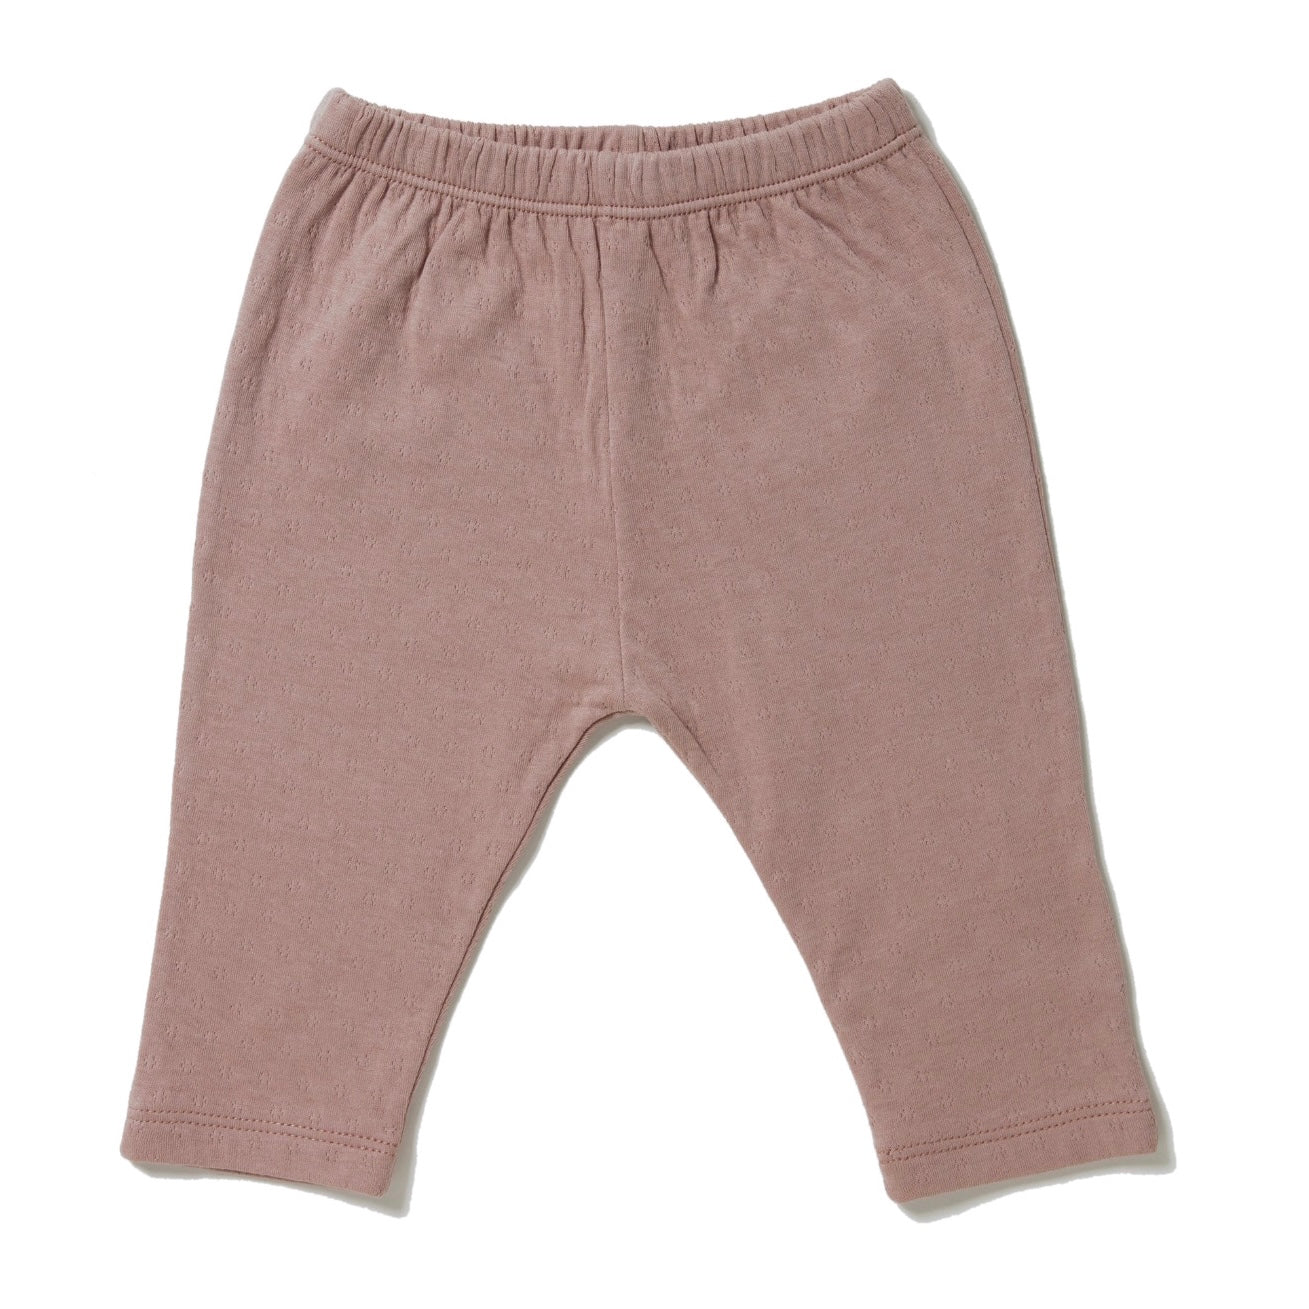 rose color straight leg pointelle ribbed pants with soft encased elastic at waistband.  100% organic cotton.